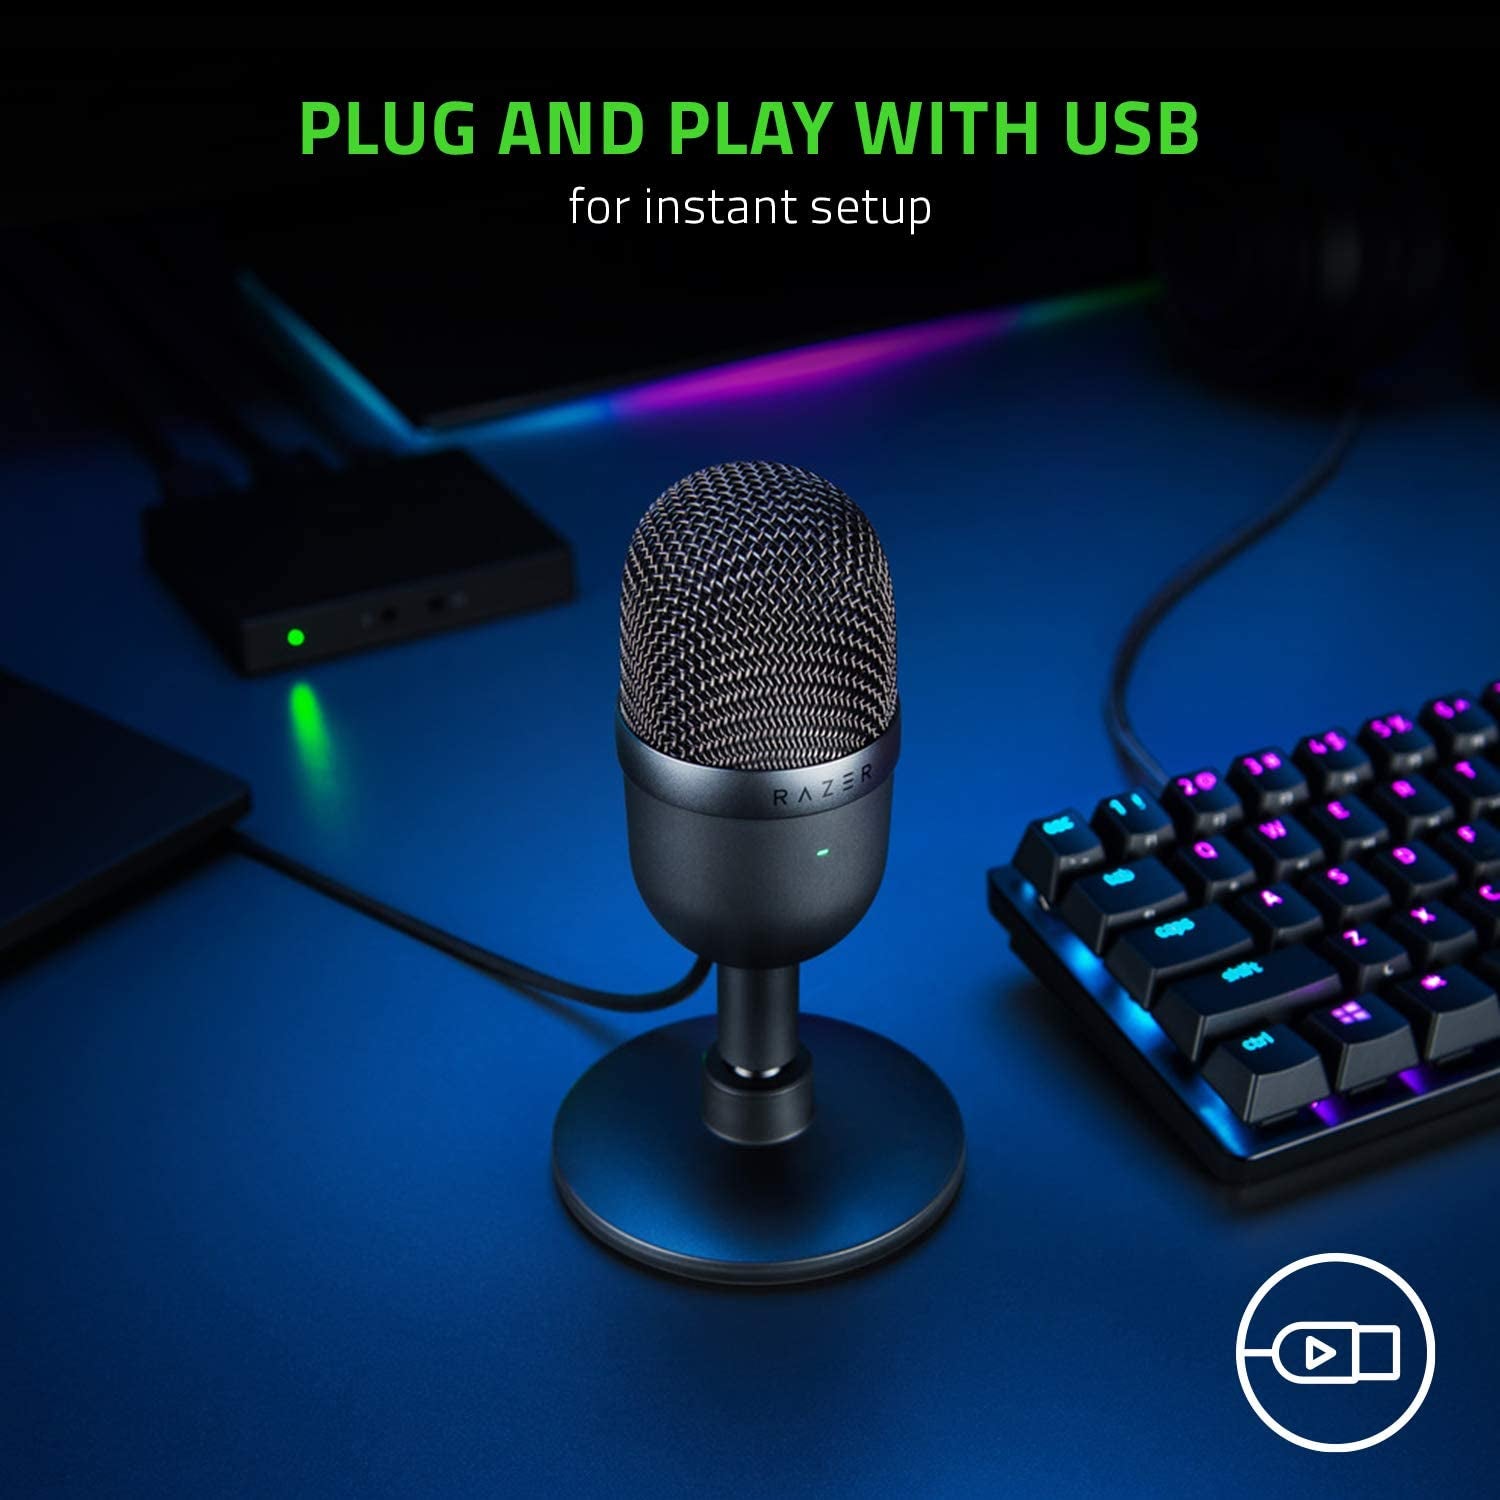 Seiren Mini USB Condenser Microphone: for Streaming and Gaming on PC - Professional Recording Quality - Precise Supercardioid Pickup Pattern - Tilting Stand - Shock Resistant - Classic Black